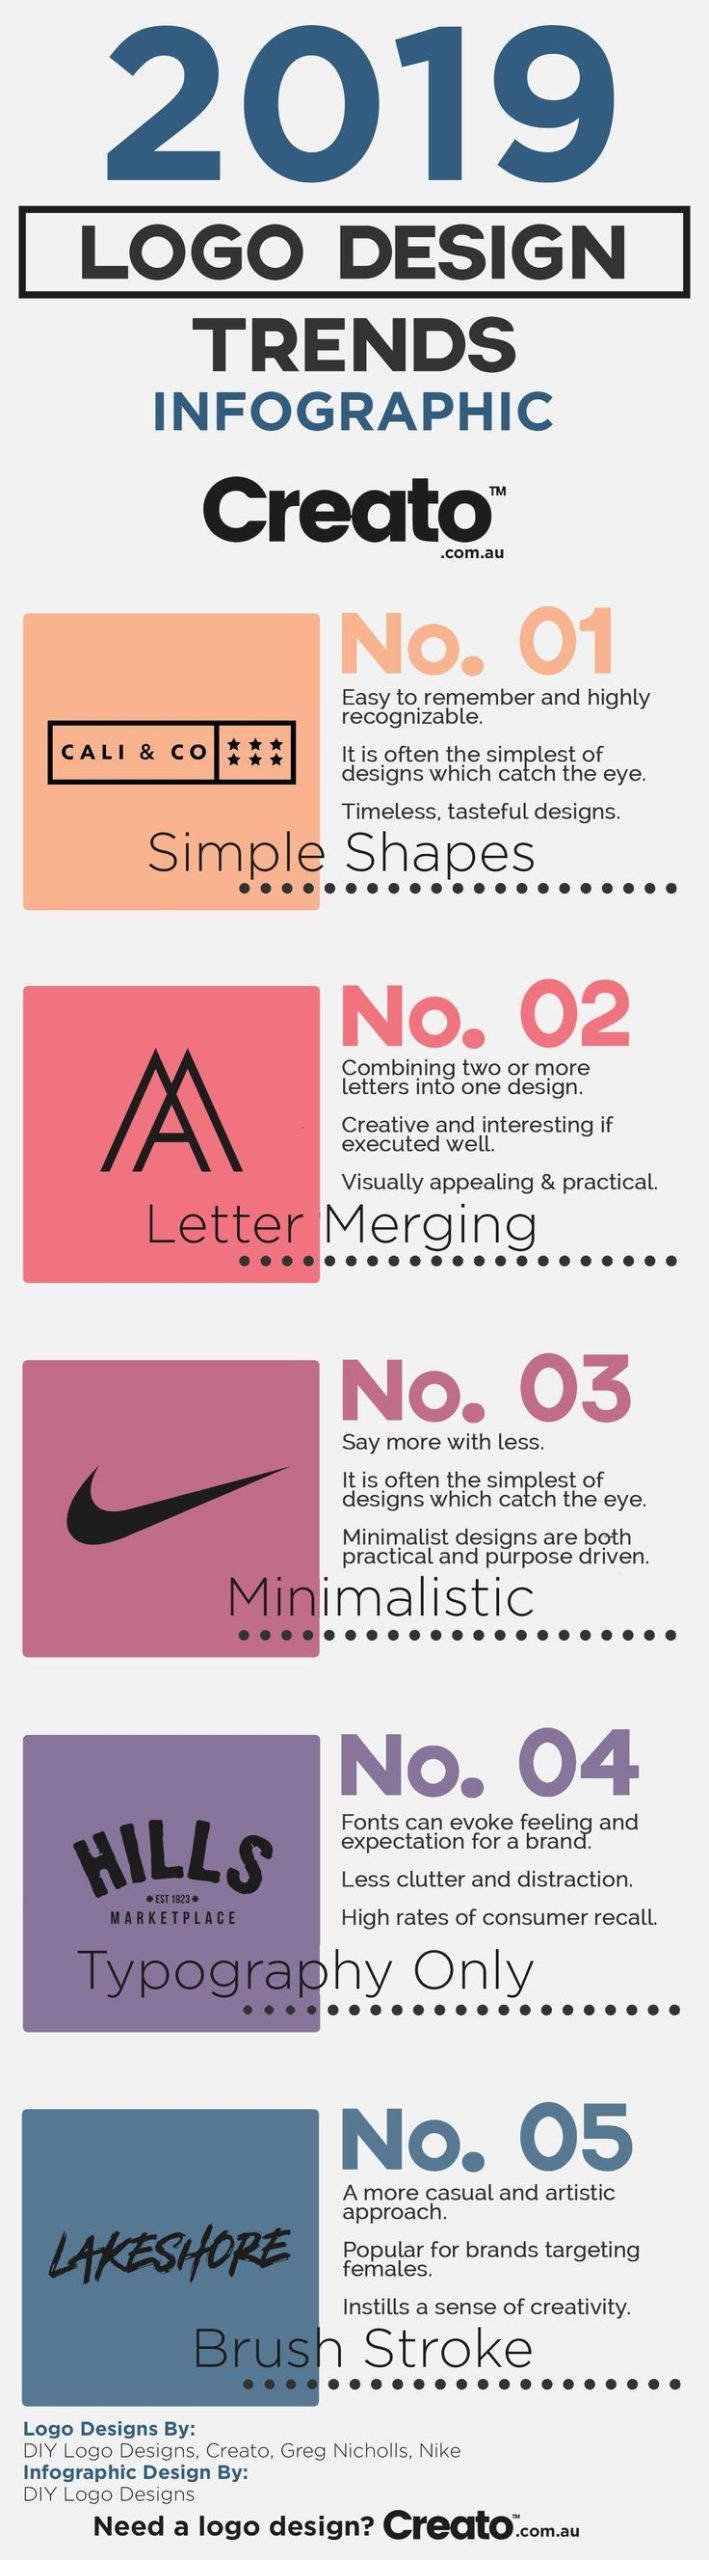 5 Logo Design Trends That Will Take Charge in 2019 [Infographic]